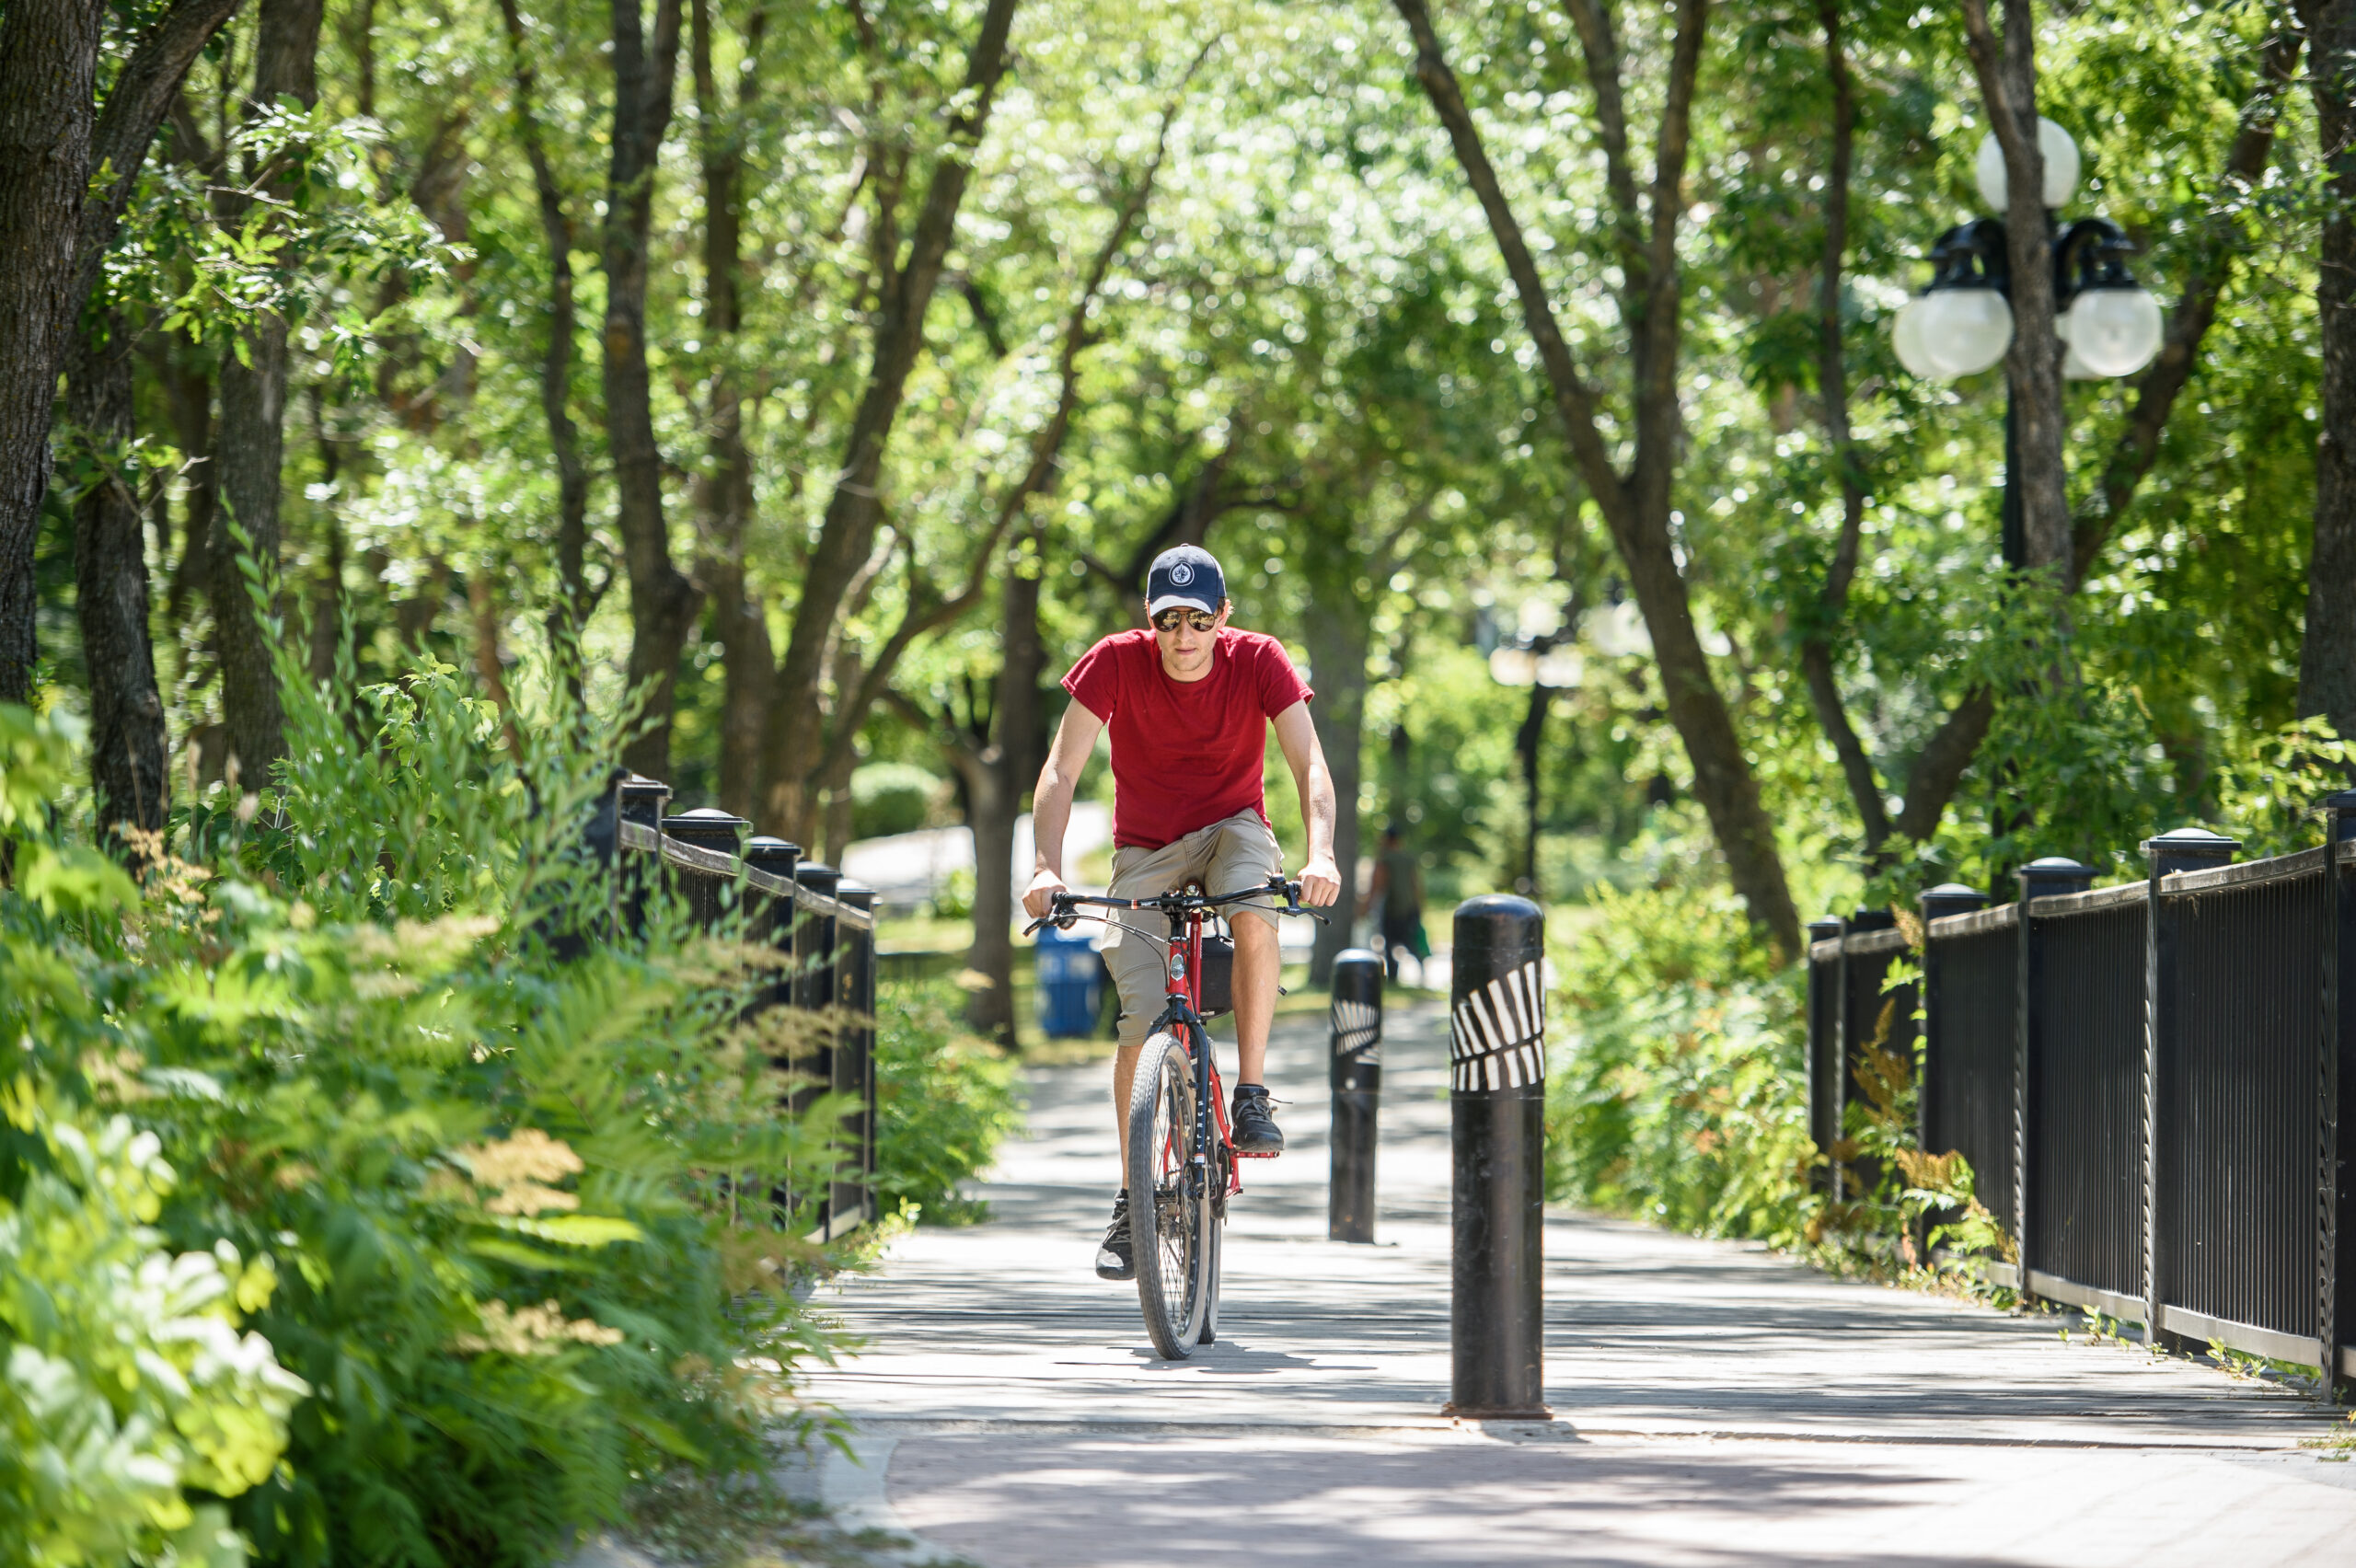 A man in a red shirt and blue cap cycles across a bridge surrounded by trees in a Winnipeg park